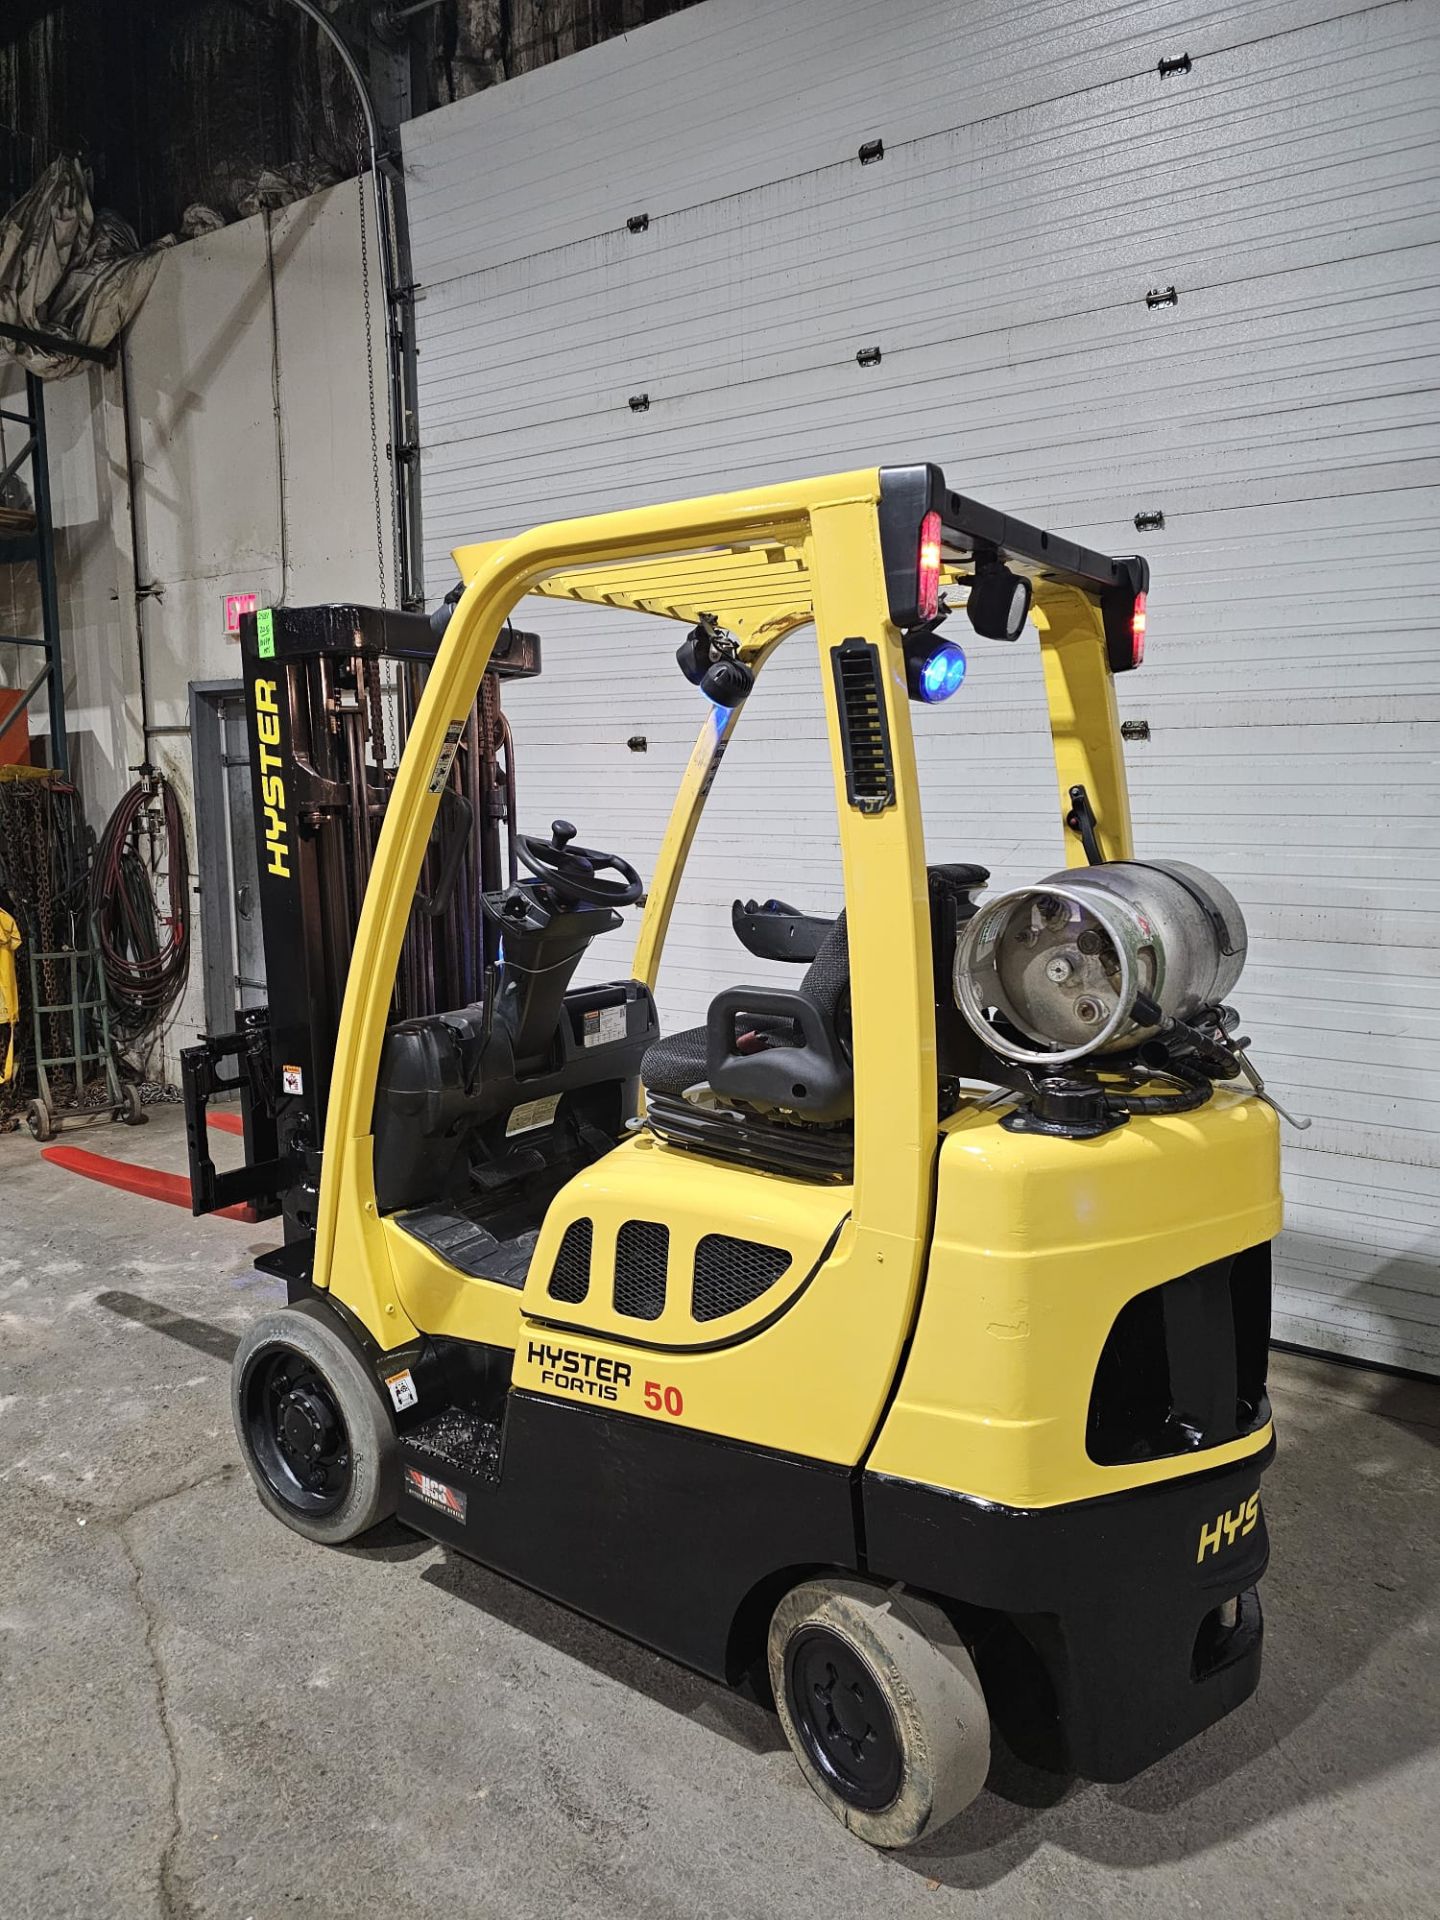 2016 HYSTER 5,000lbs Capacity LPG (Propane) Forklift with sideshift - 4 function control hookup & - Image 3 of 8